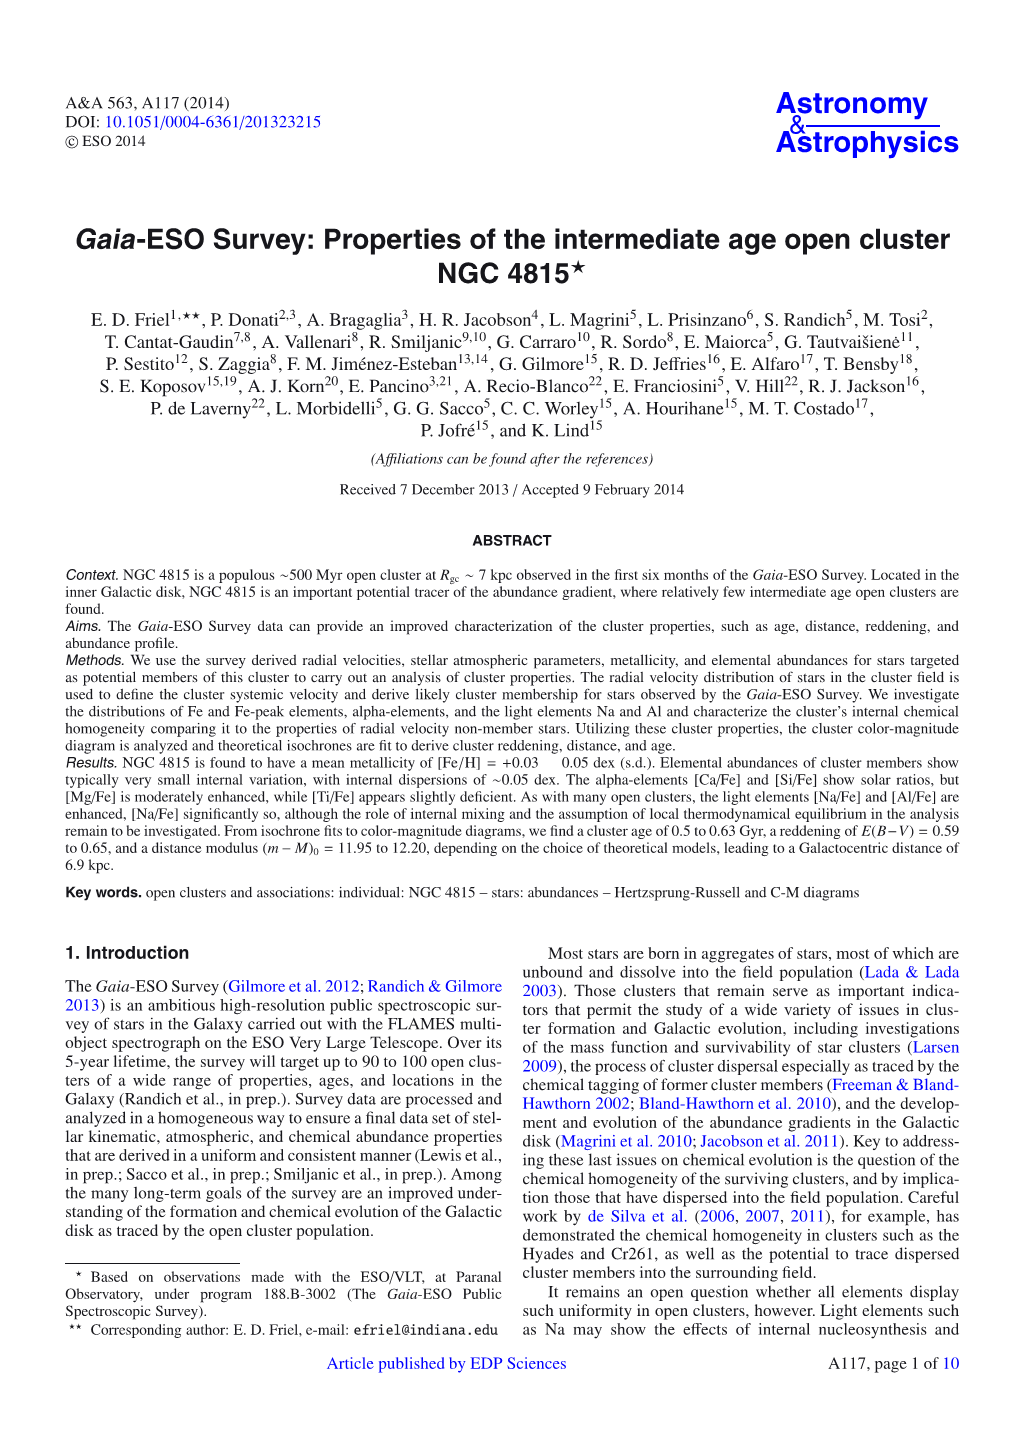 Gaia-ESO Survey: Properties of the Intermediate Age Open Cluster NGC 4815